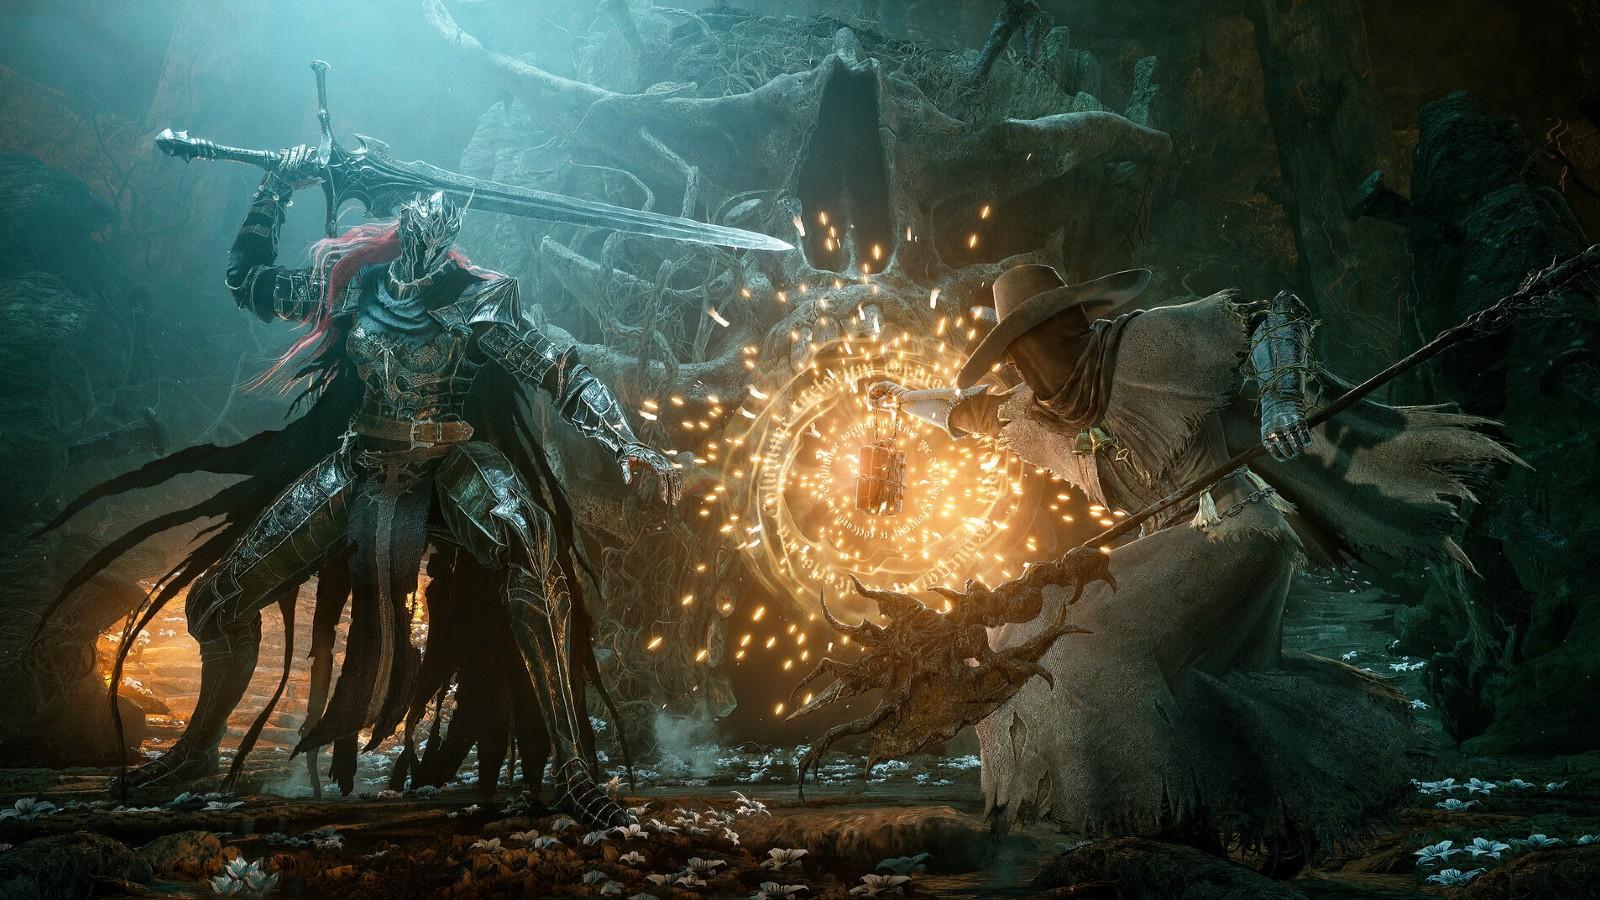 A promotional image from The Lords of the Fallen featuring combat.